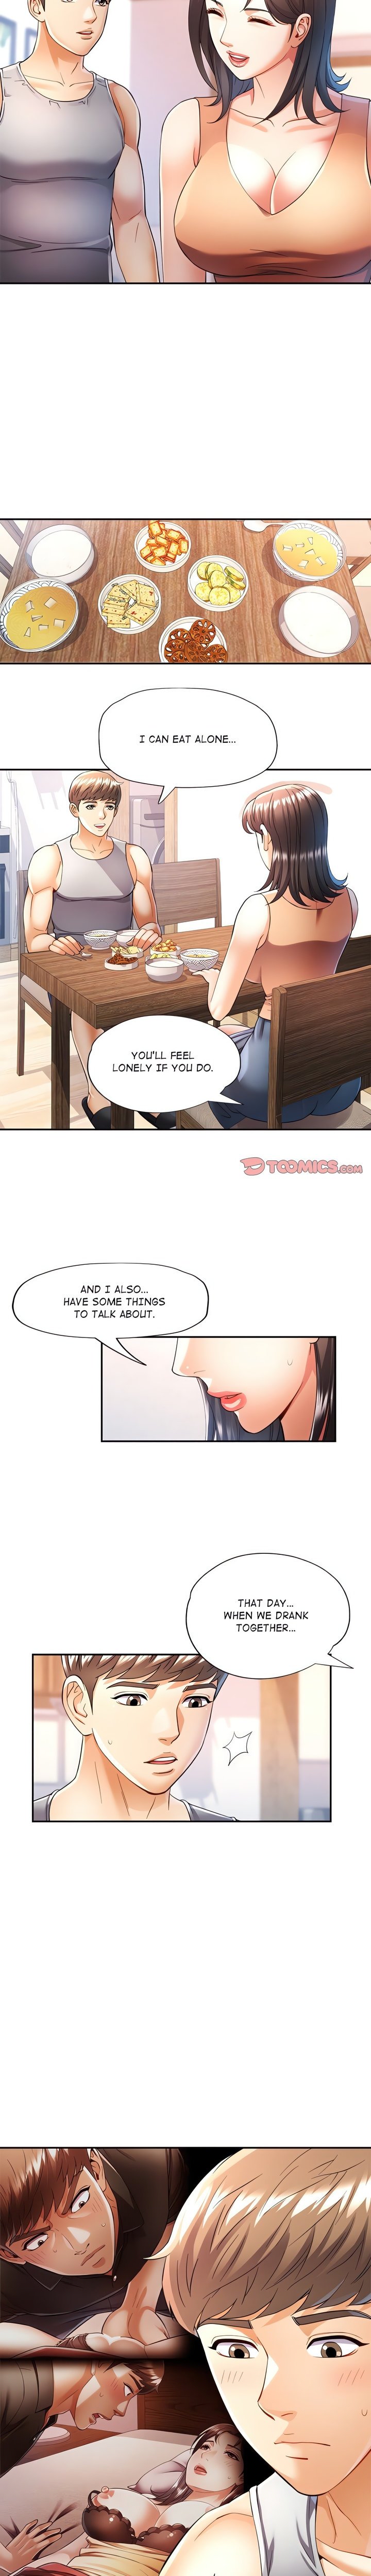 in-her-place-chap-27-4